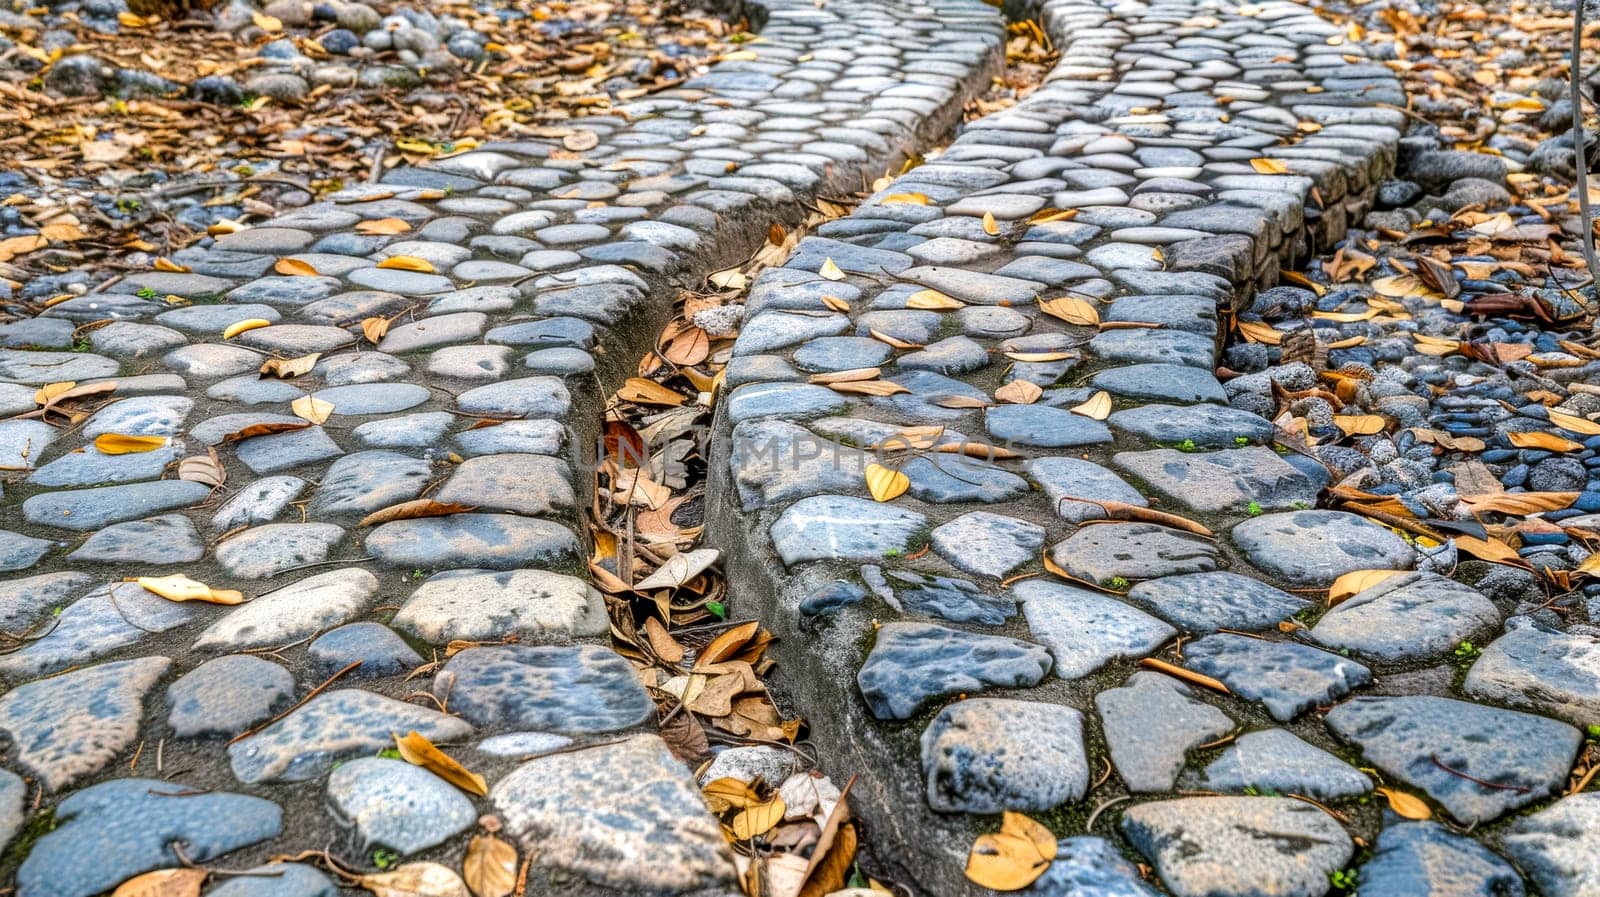 Low-angle view of winding cobblestone pathways surrounded by fallen autumn leaves